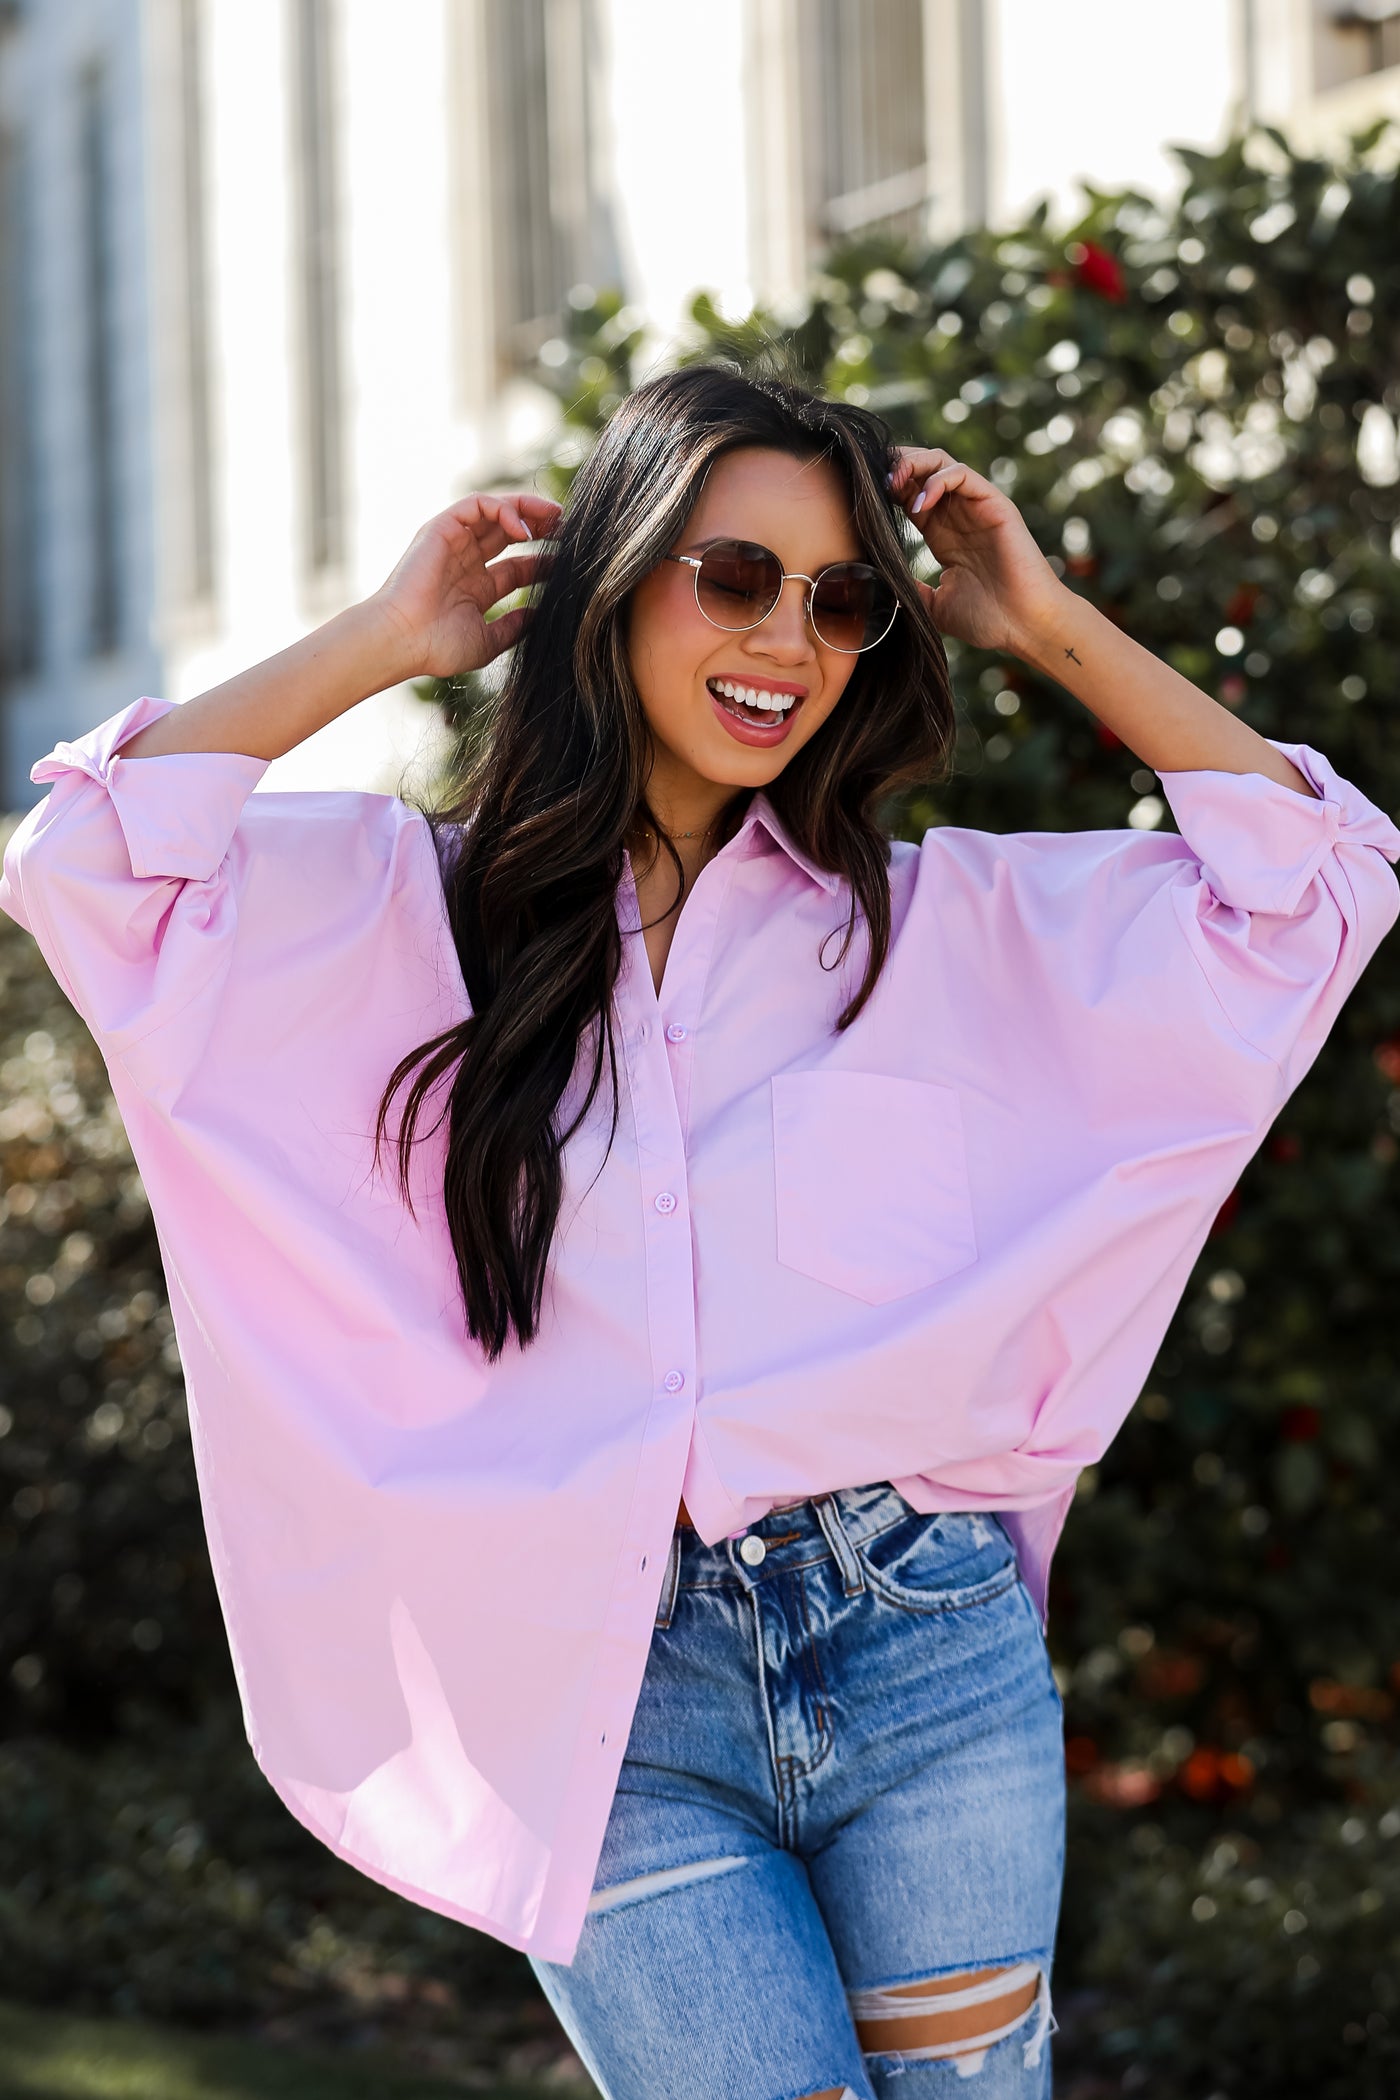 oversized button up